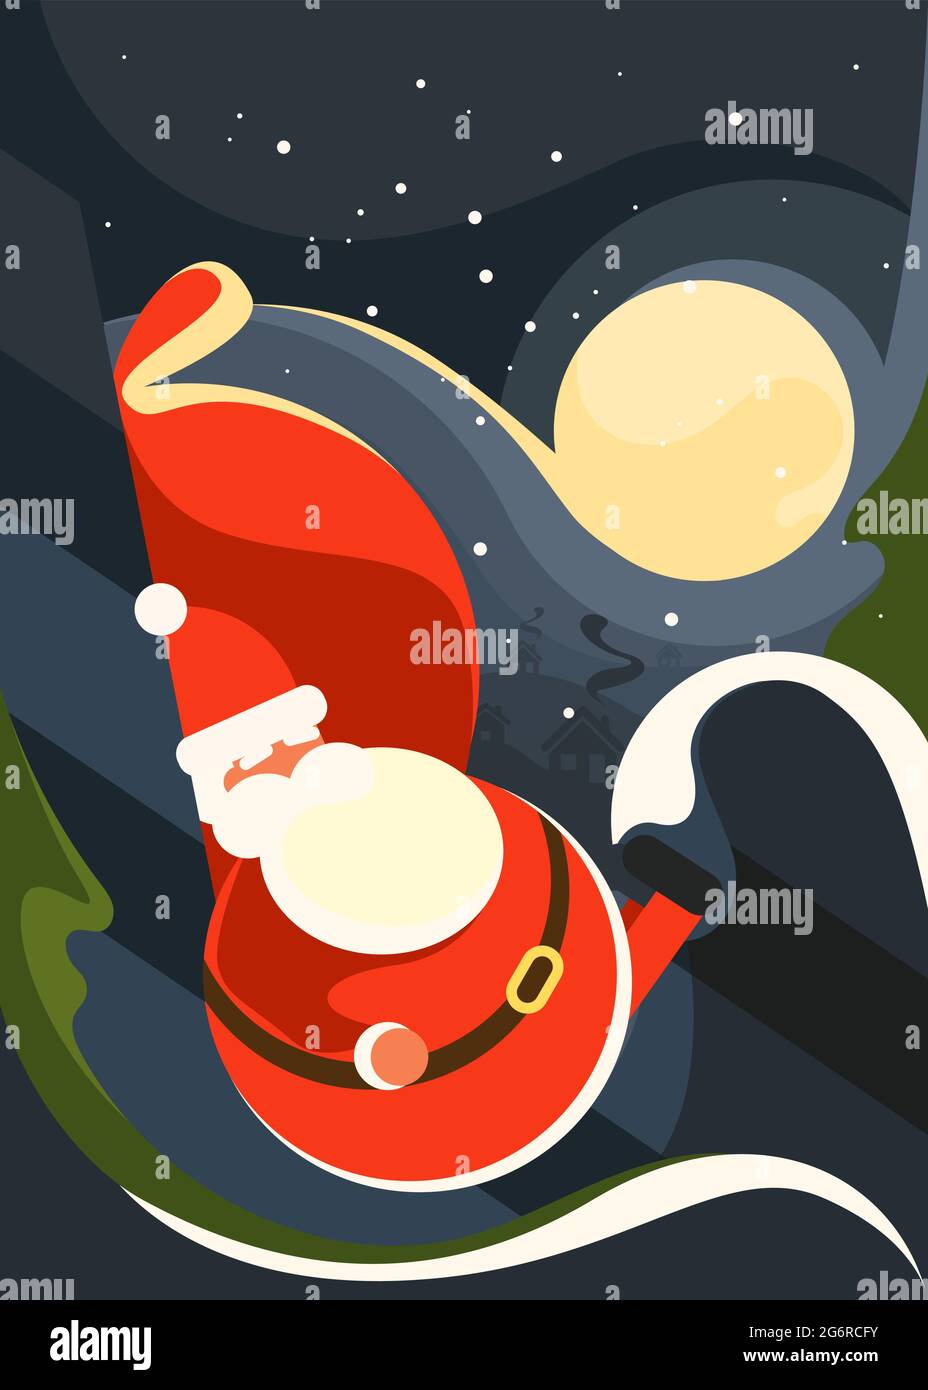 Poster with Santa Claus on the background of moon. Christmas placard design in flat style. Stock Vector